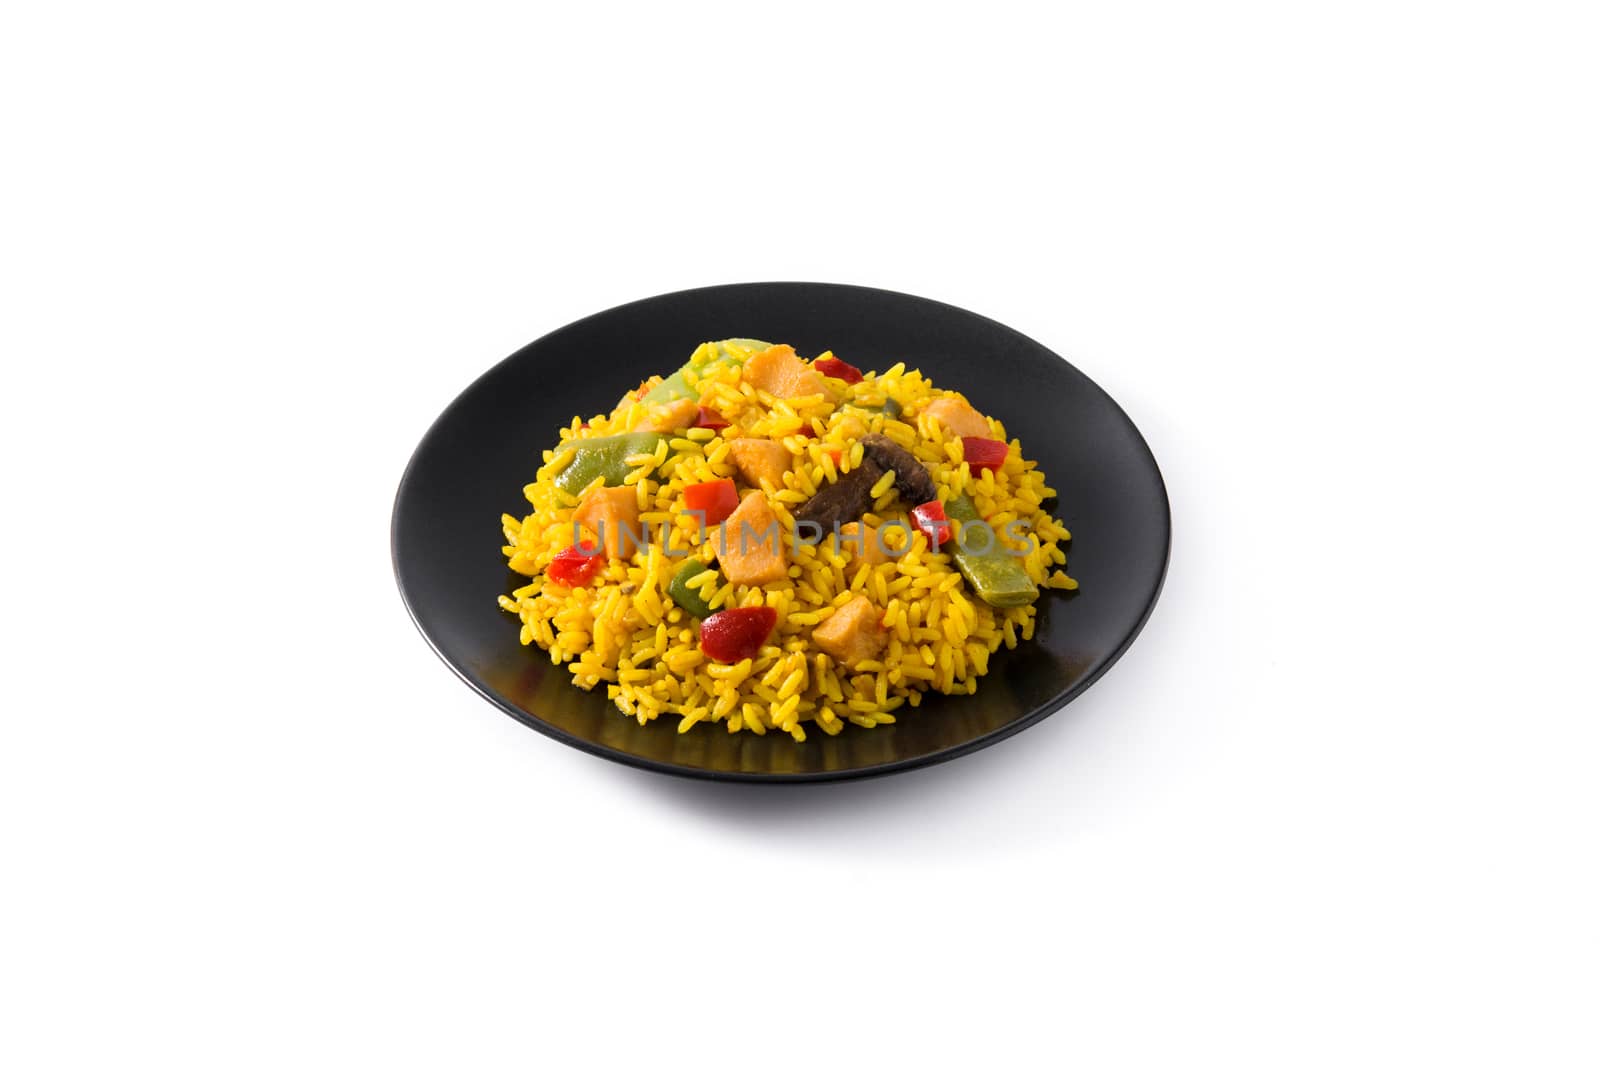 Fried rice with chicken and vegetables on black plate isolated on white background